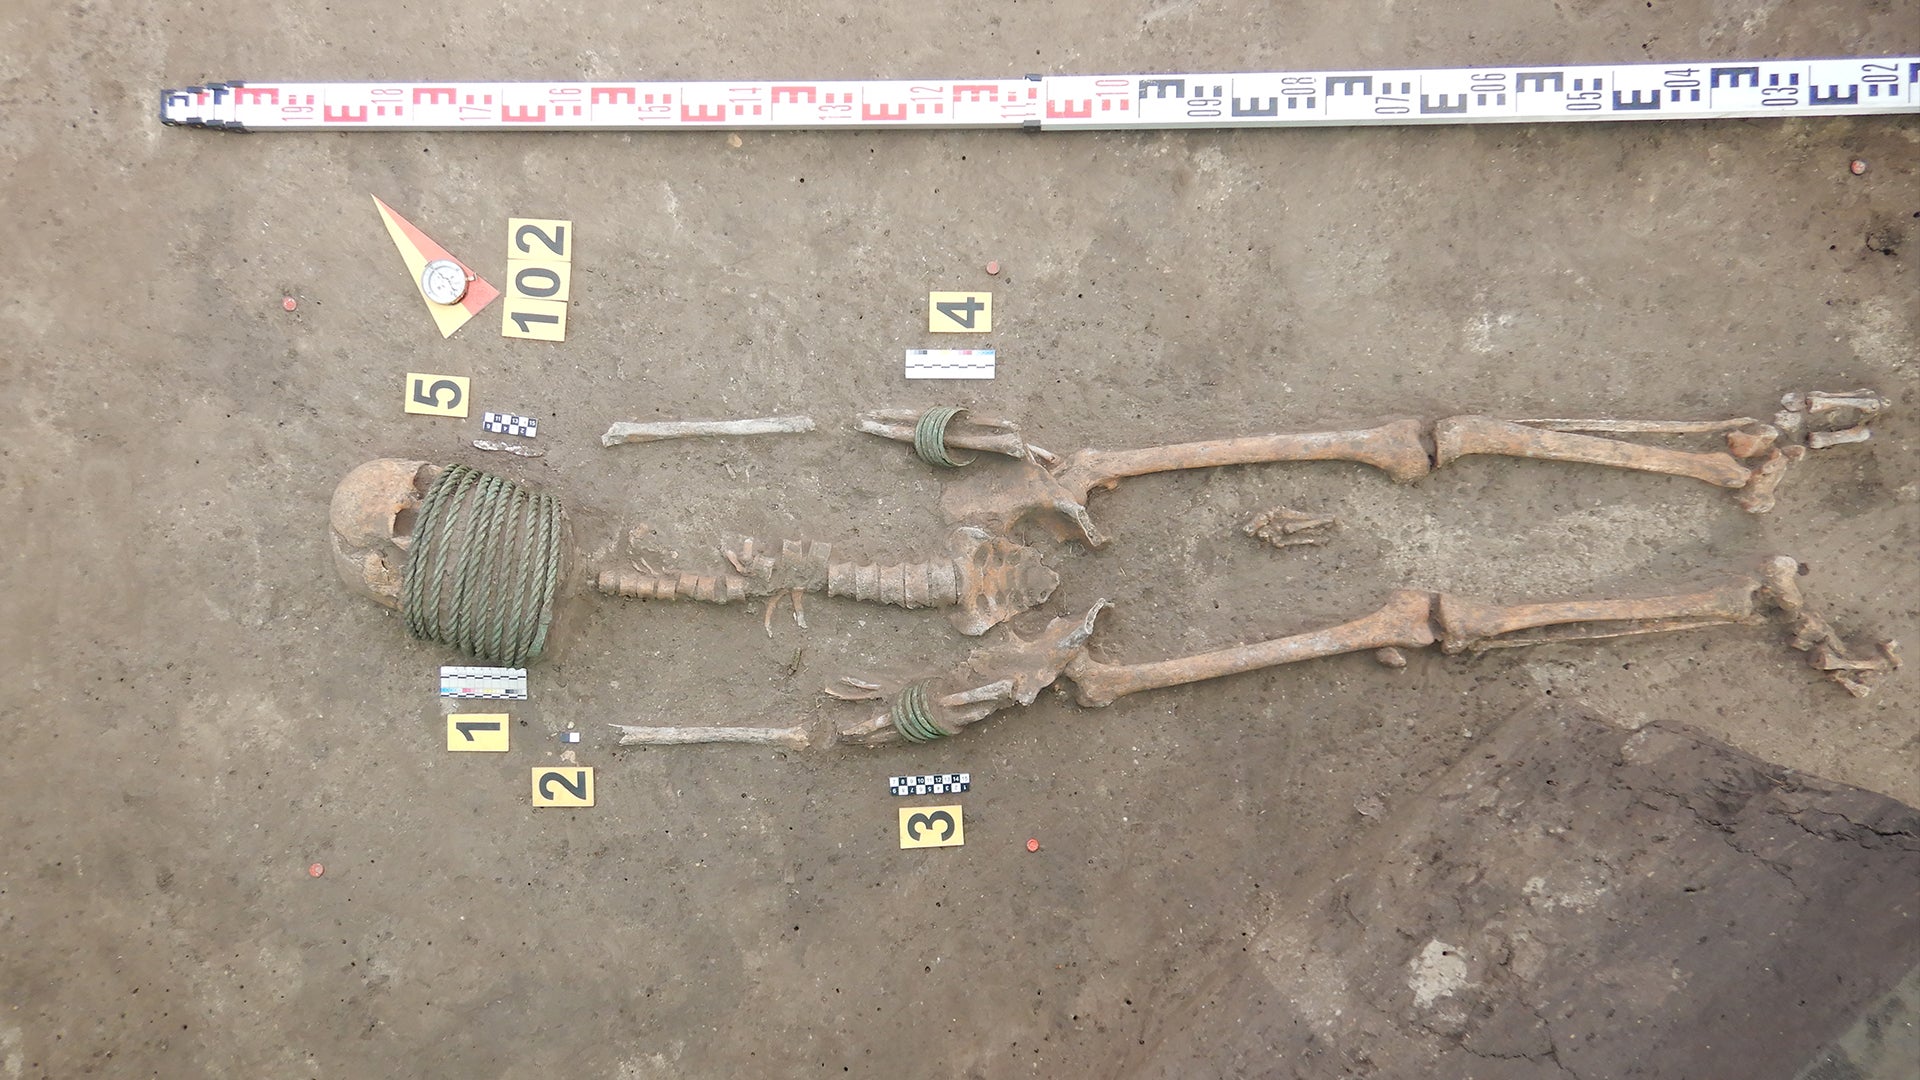 The bones were also found with axes, swords, spears and jewellry